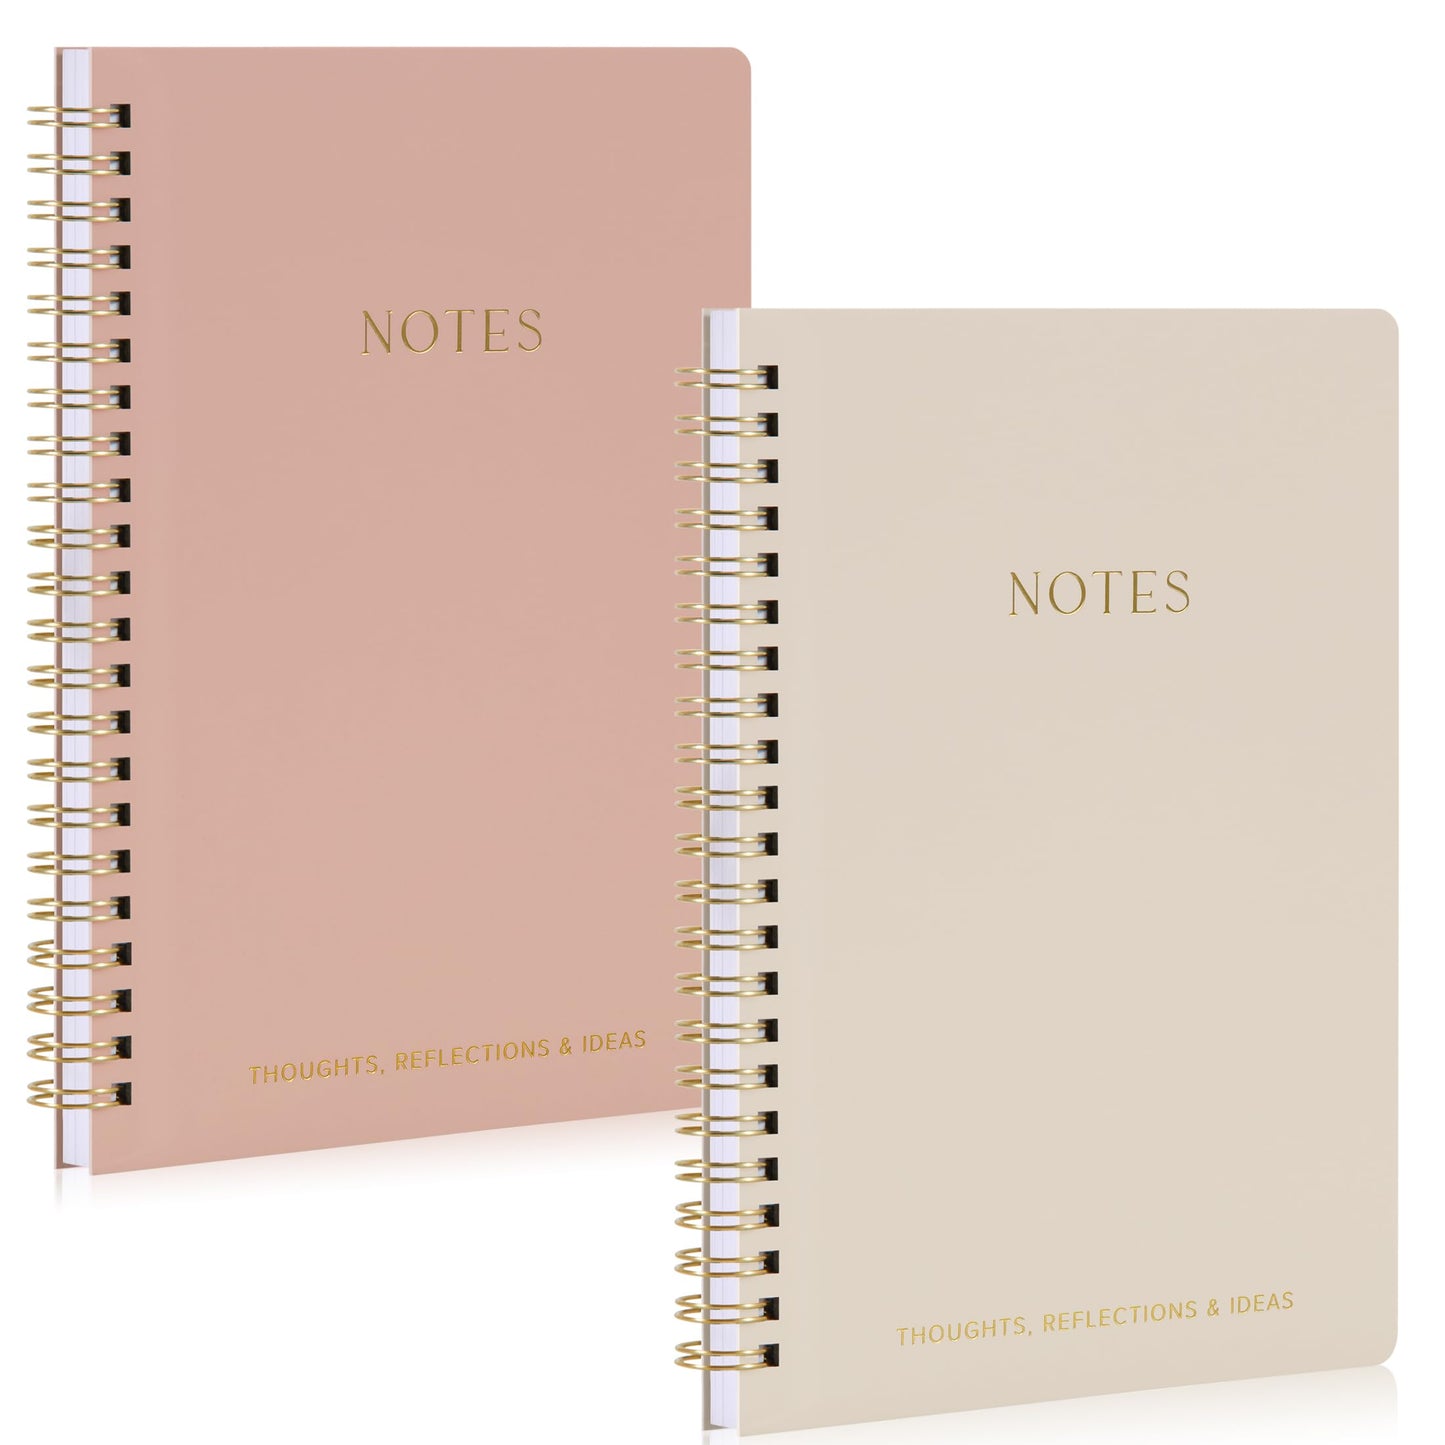 ZICOTO Aesthetic Spiral Notebook Set of 2 For Women and Men - Cute Ruled 8x6 Journal/Notebook with Pockets And Lined Pages - Perfect A5 Supplies to Stay Organized at Work or School